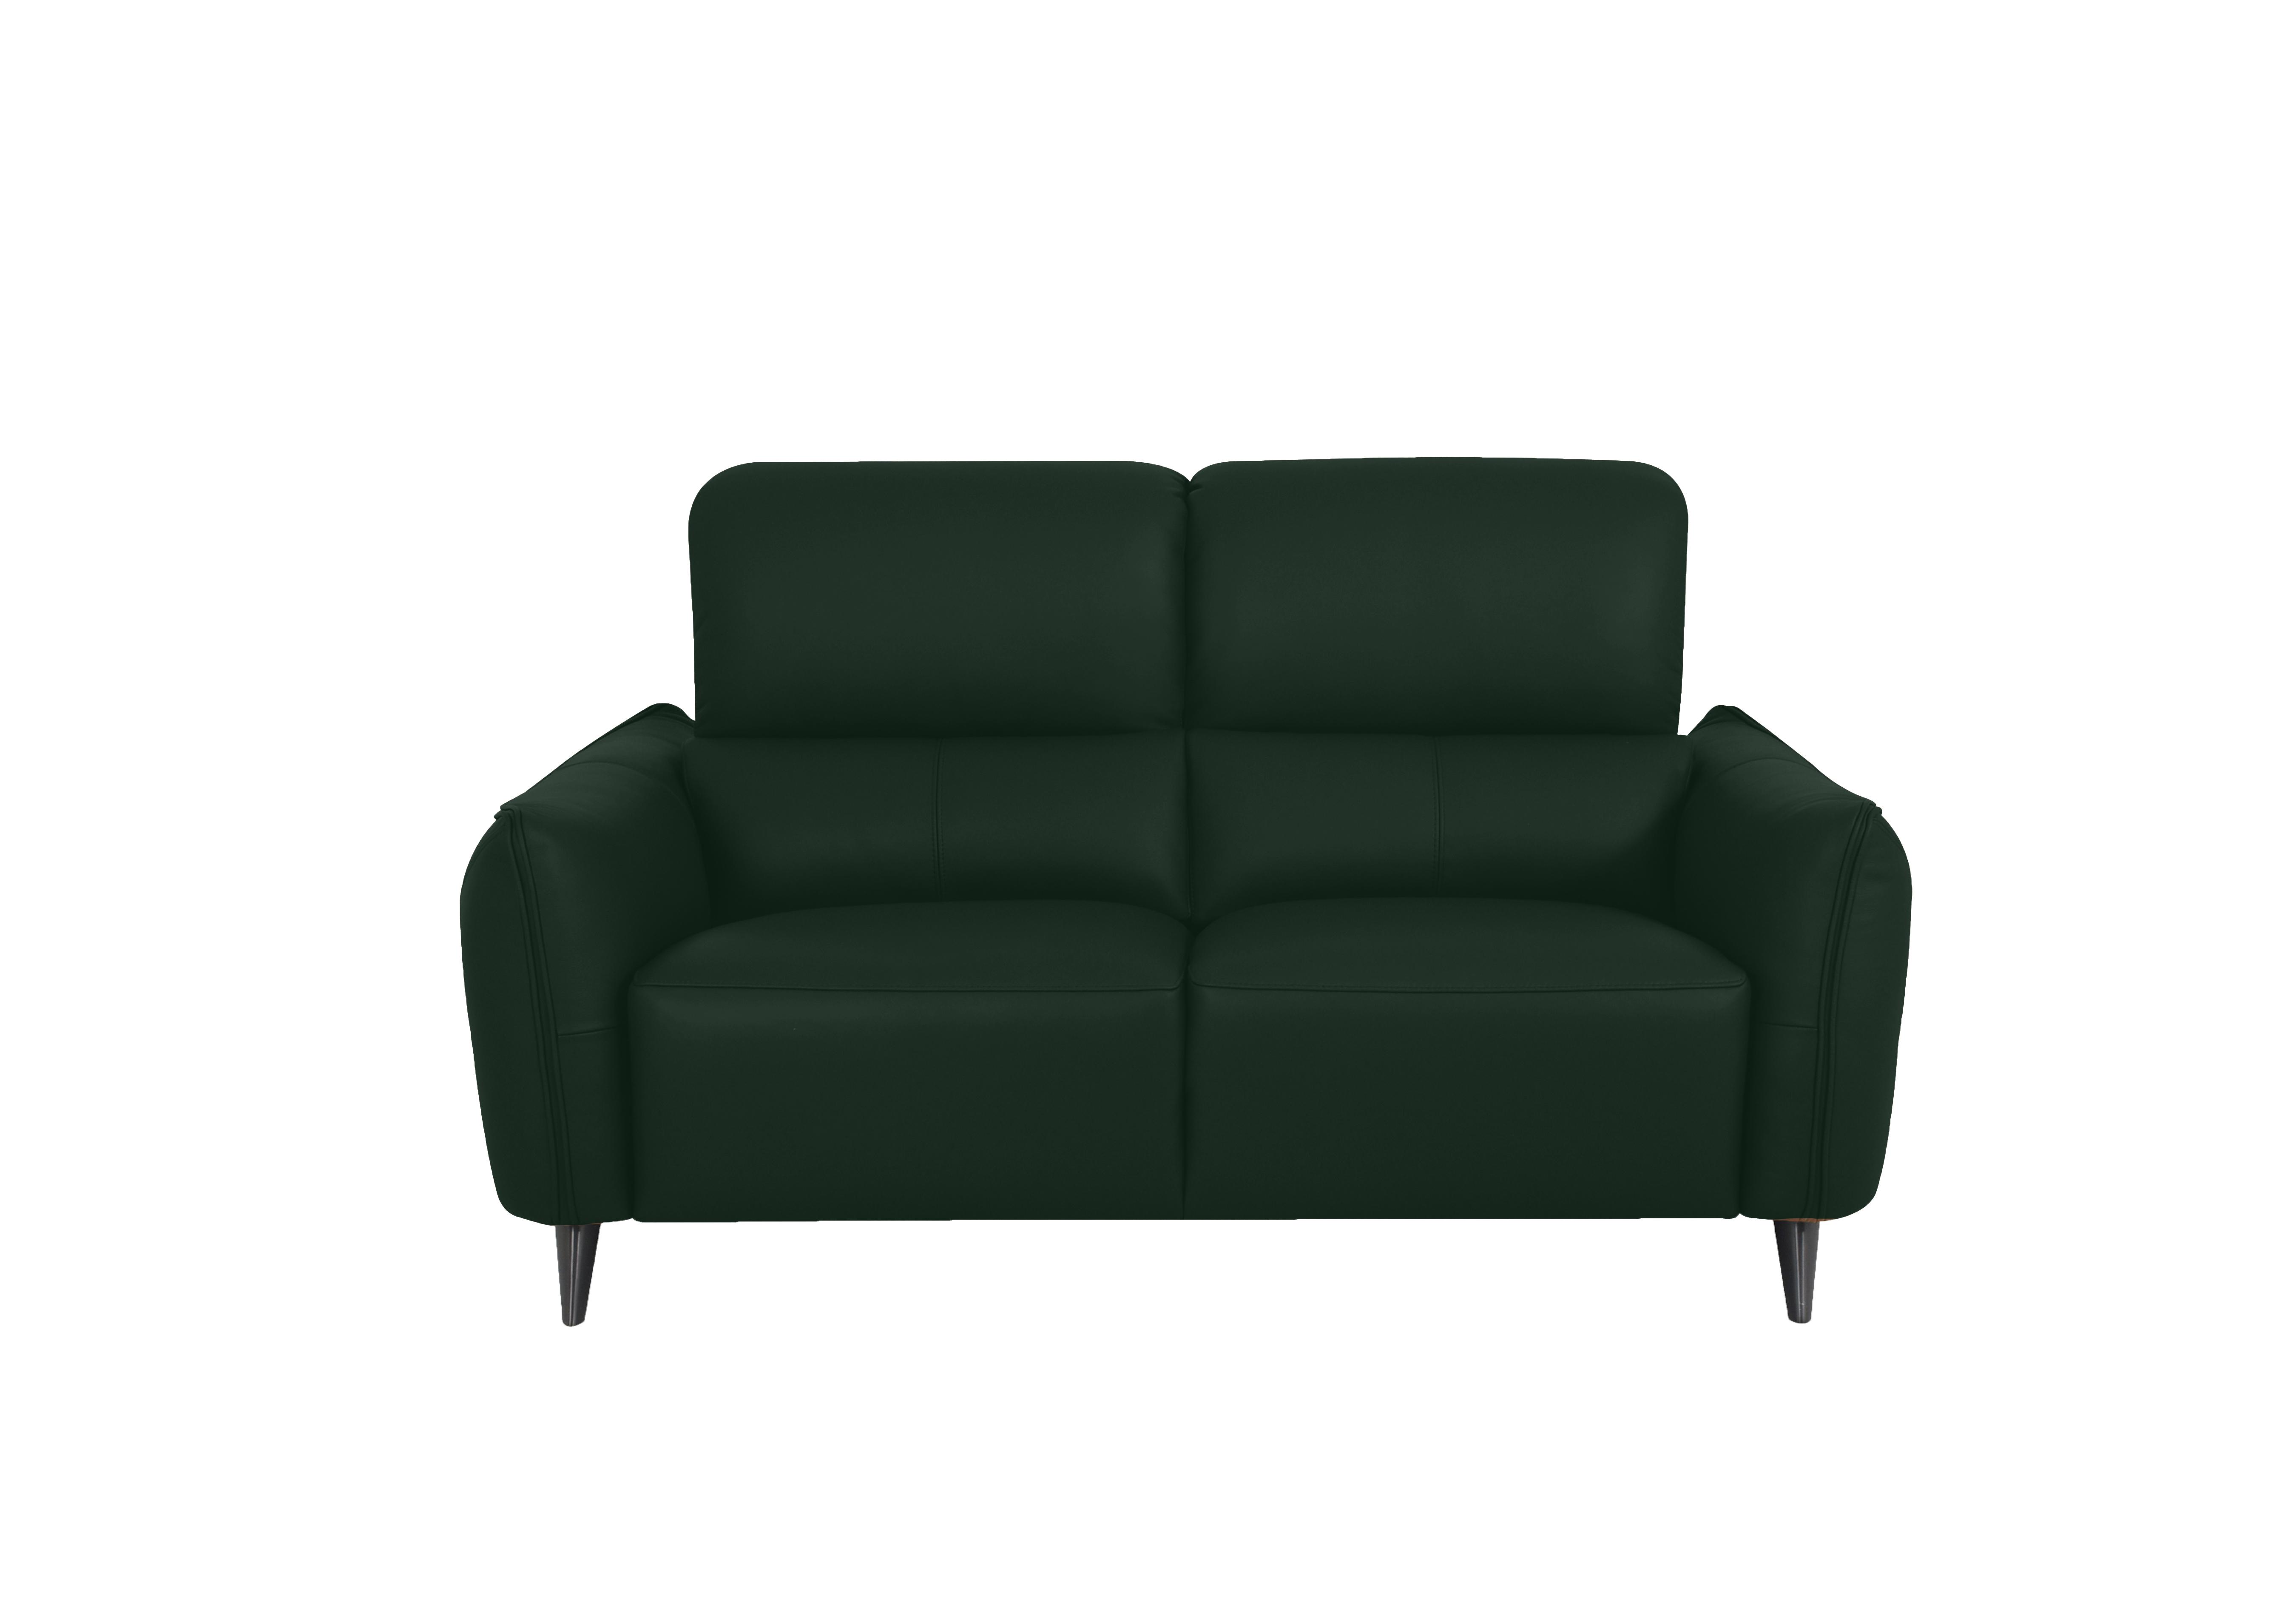 Maddox 2.5 Seater Leather Sofa in Np-603e Dark Forest on Furniture Village